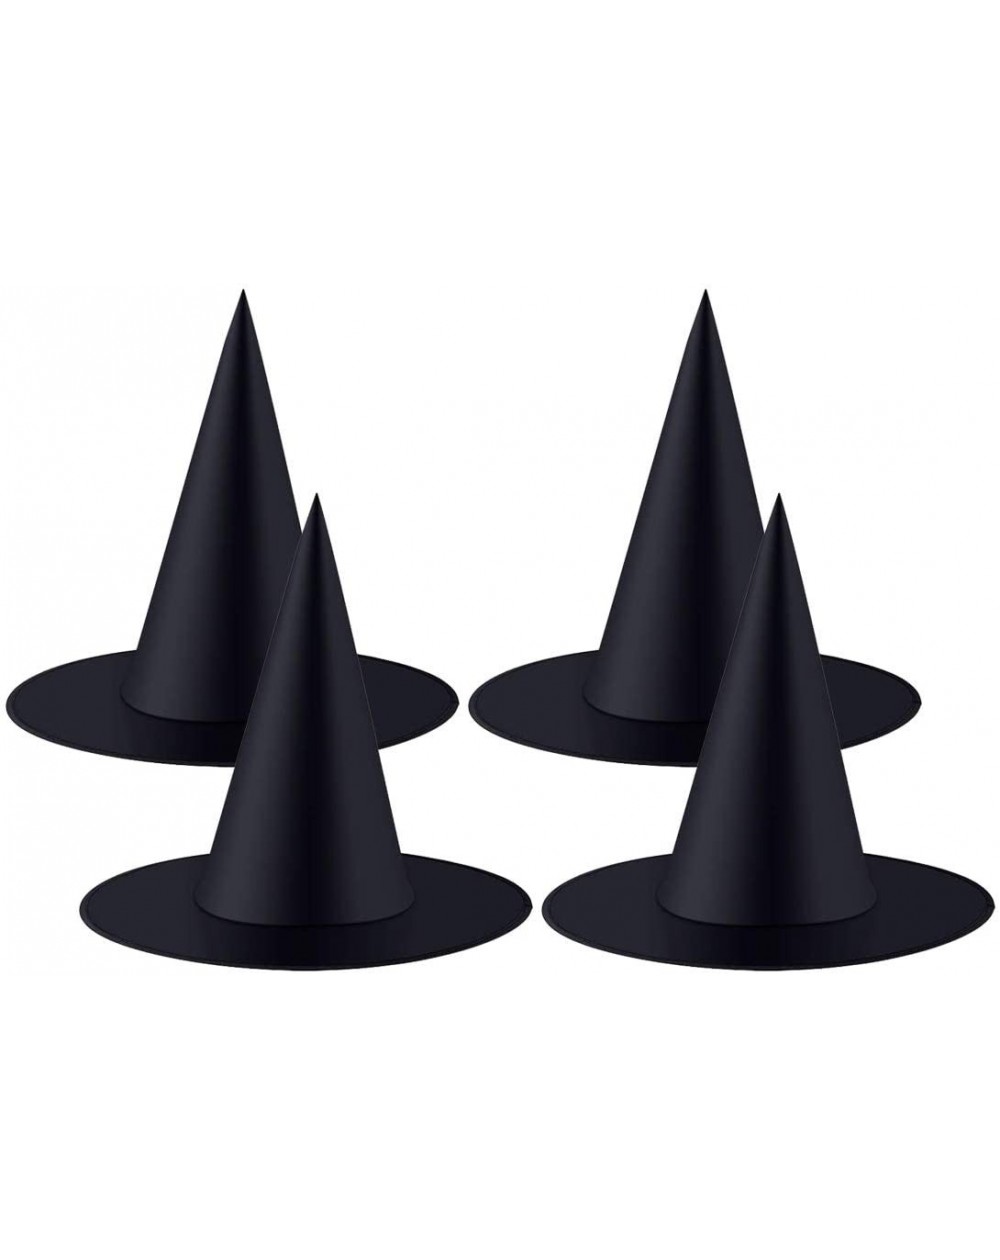 Party Hats 4 Pieces Halloween Witch Hat Costume Accessory for Halloween Christmas Party- Black - CT19EWCSXC9 $18.39